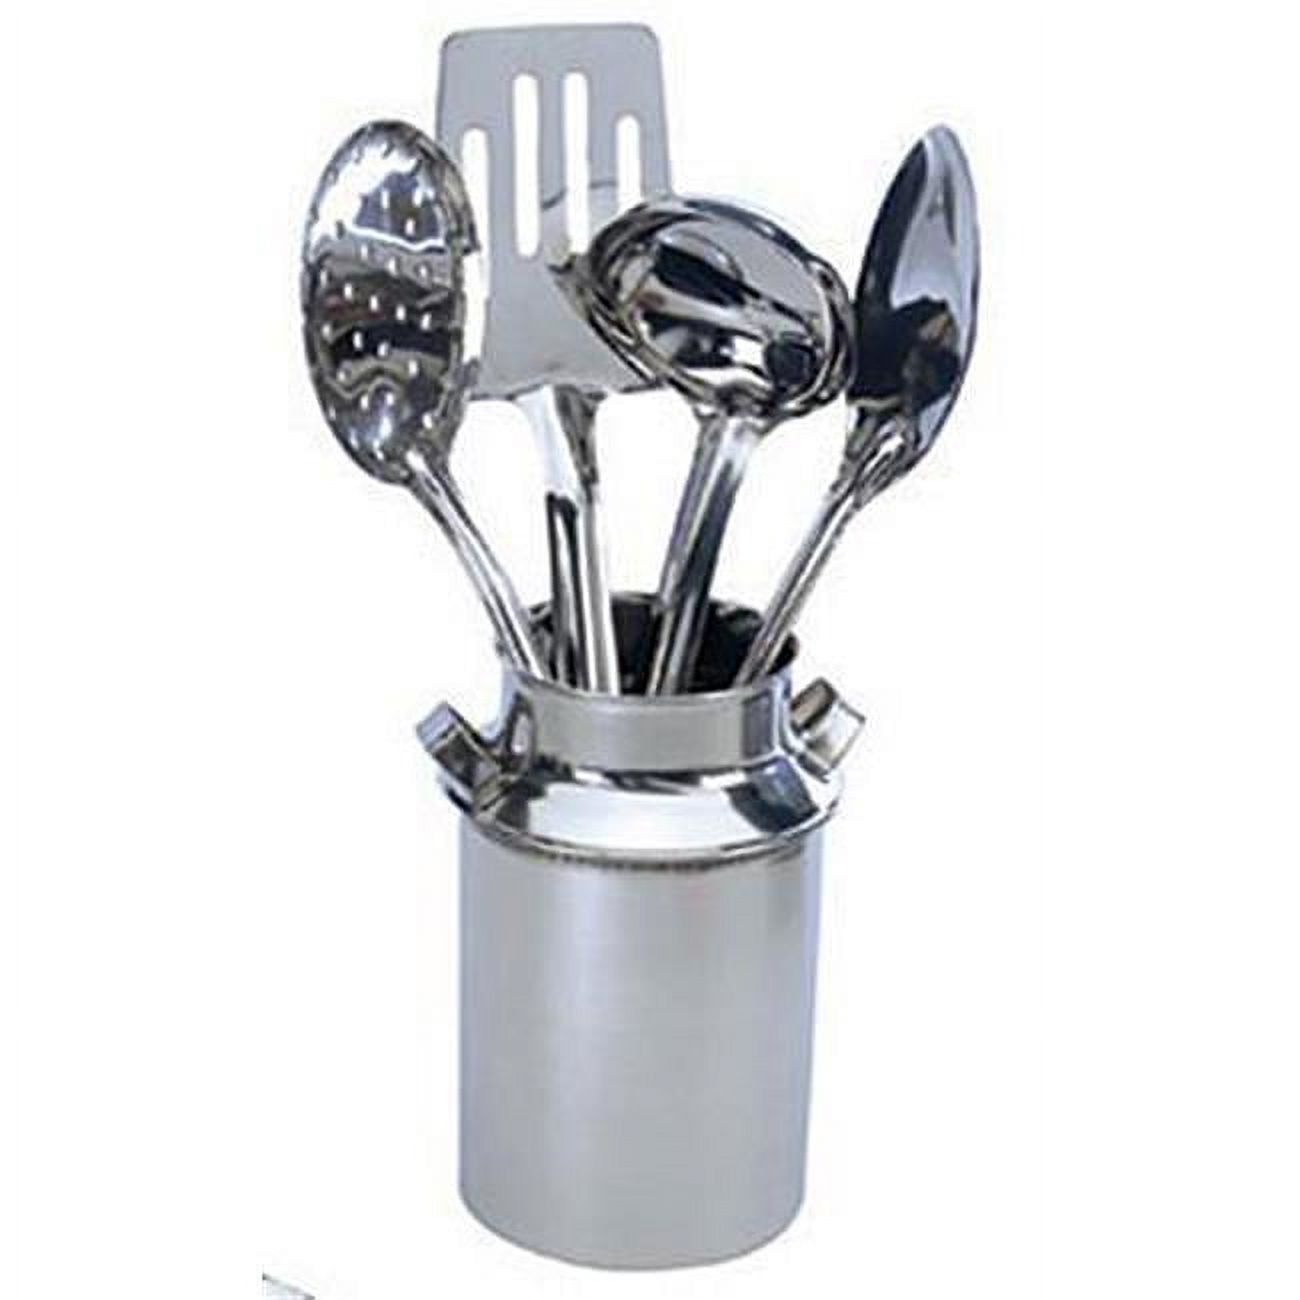 Star Dist 92362 Stainless Steel Kitchen Tool - Piece of 7 - image 1 of 2